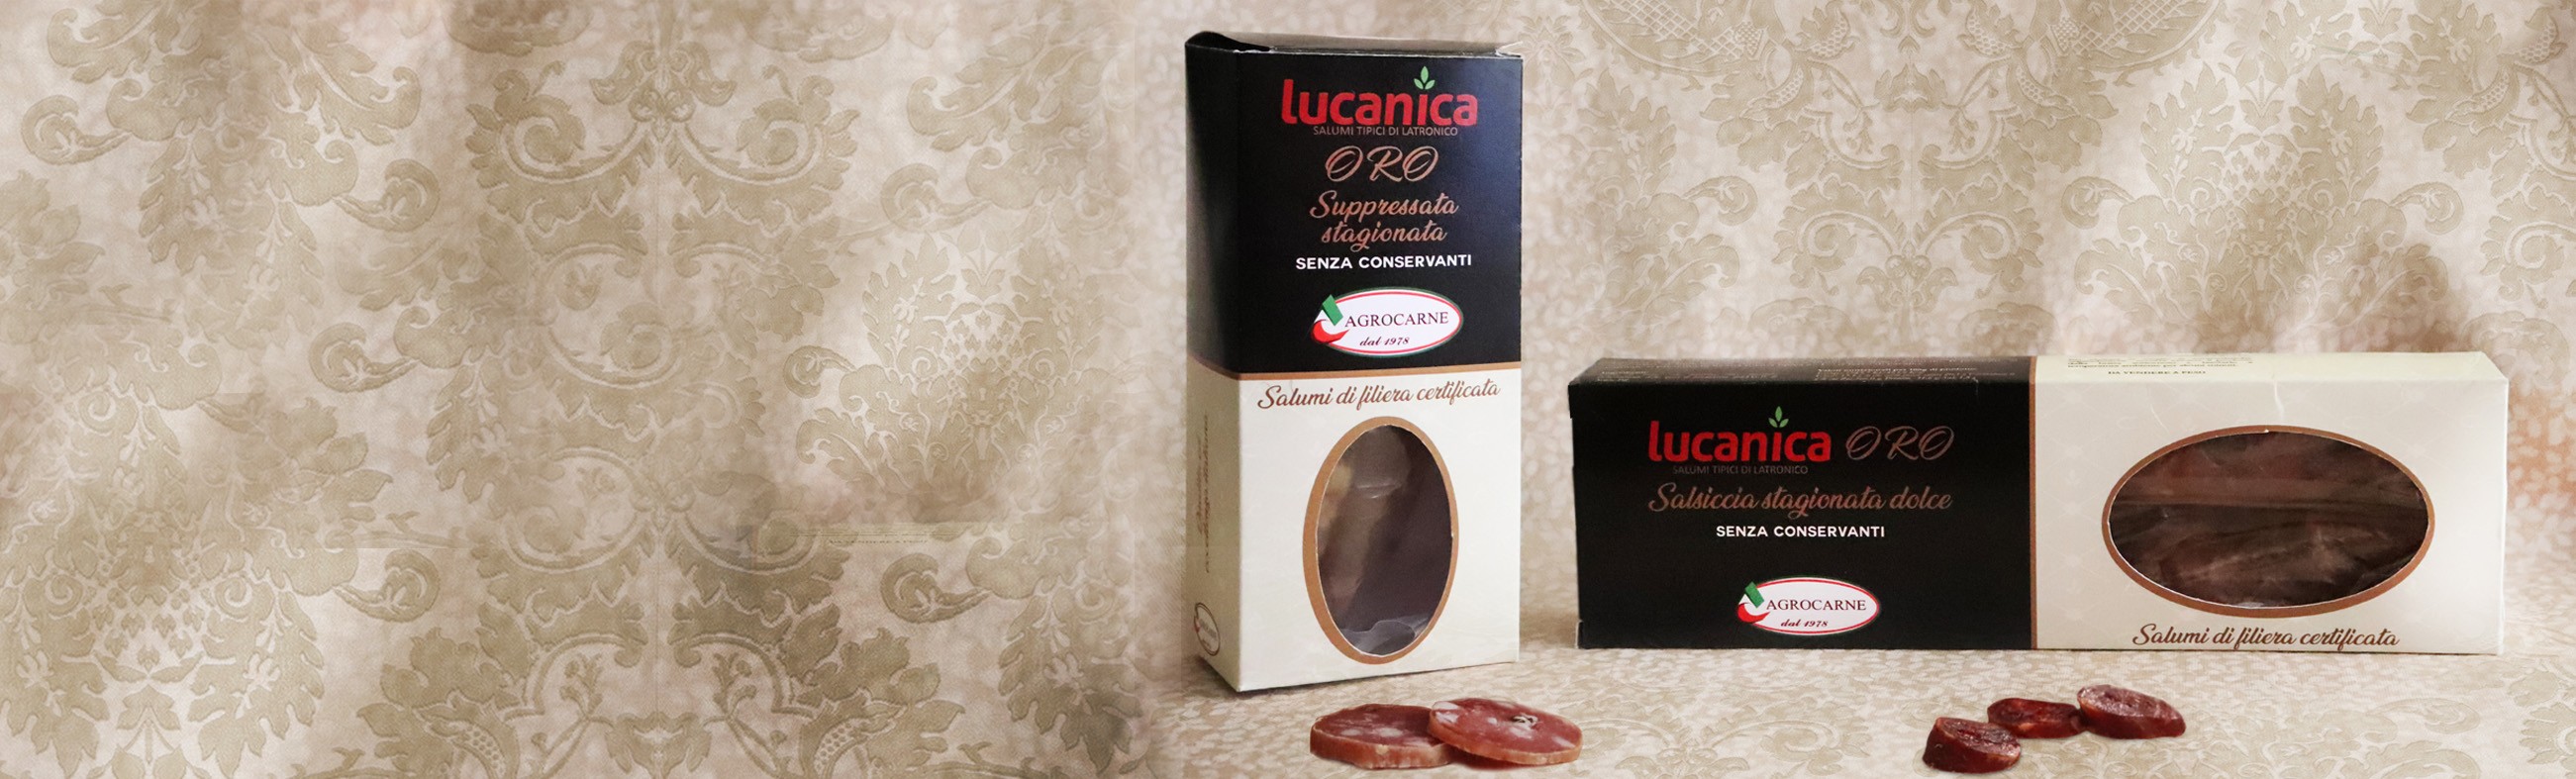 LUCANICA GOLD LINE WITHOUT PRESERVATIVES